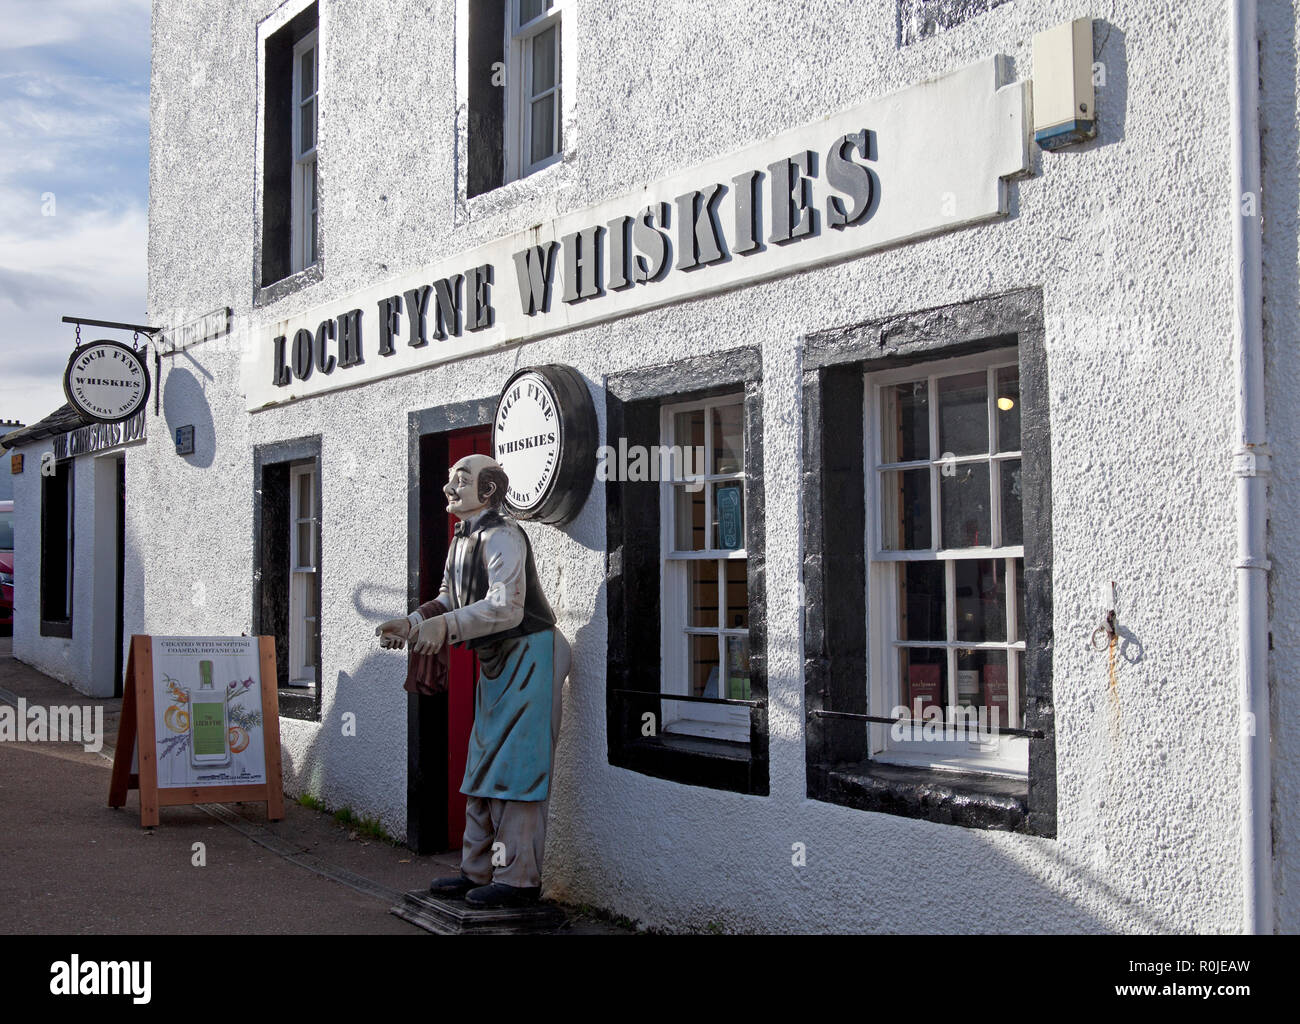 Le Loch Fyne Whiskies, Iverary, Argyll and Bute, Ecosse, Royaume-Uni Banque D'Images